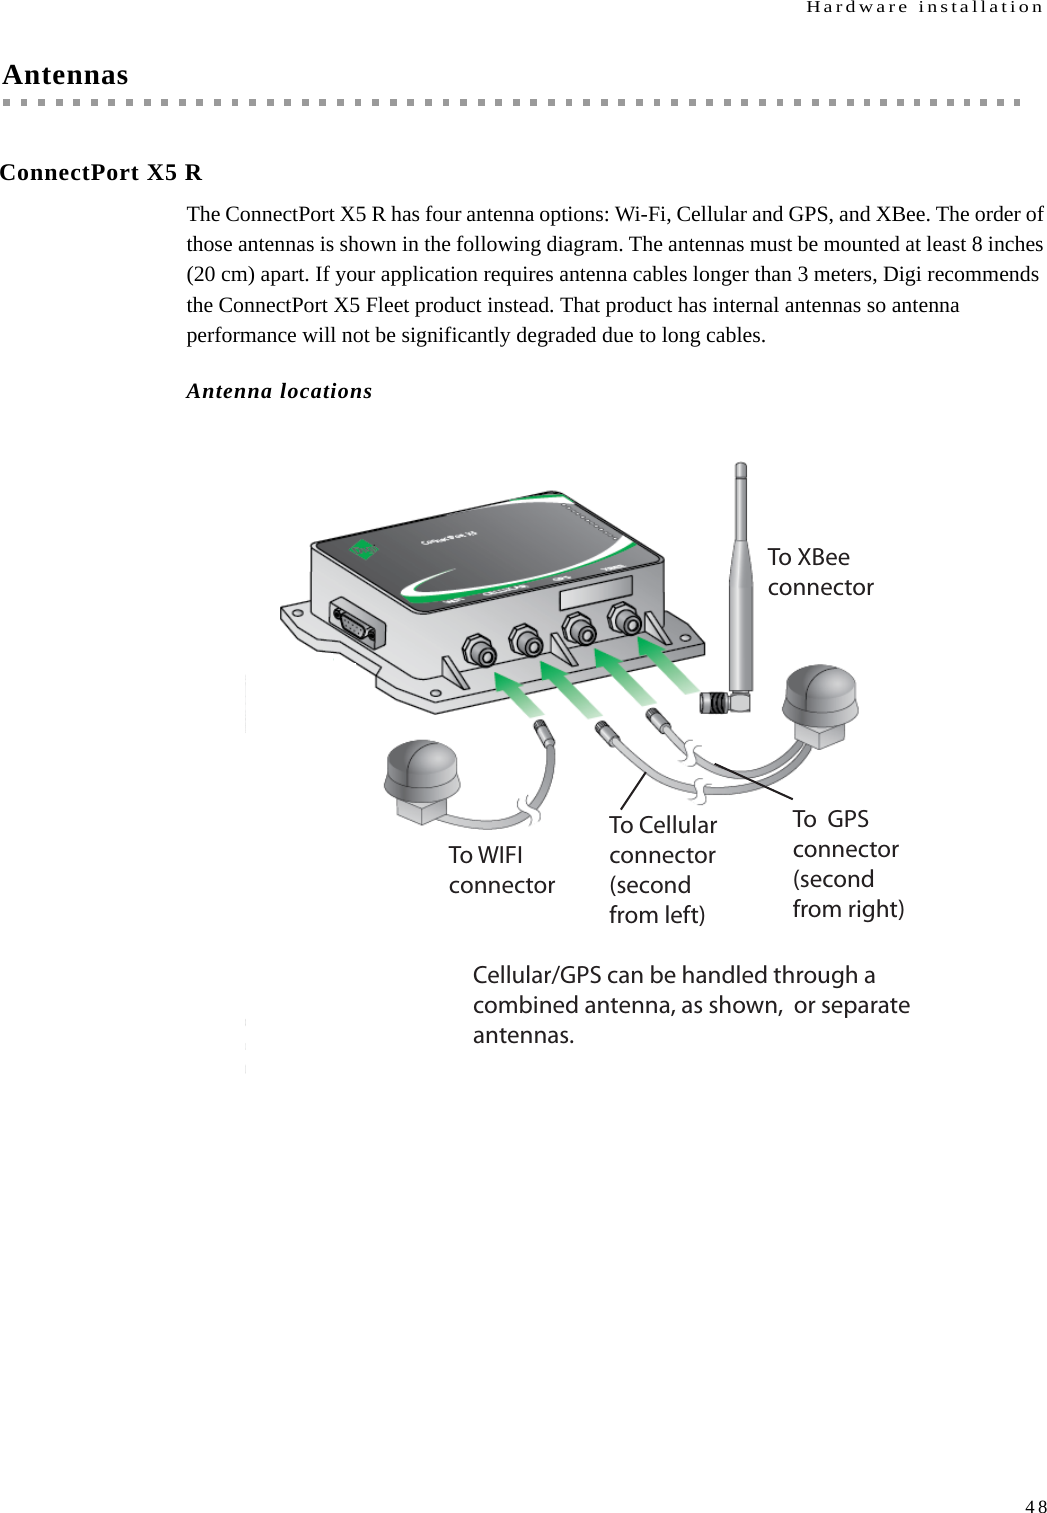 Hardware installation48AntennasConnectPort X5 RThe ConnectPort X5 R has four antenna options: Wi-Fi, Cellular and GPS, and XBee. The order of those antennas is shown in the following diagram. The antennas must be mounted at least 8 inches (20 cm) apart. If your application requires antenna cables longer than 3 meters, Digi recommends the ConnectPort X5 Fleet product instead. That product has internal antennas so antenna performance will not be significantly degraded due to long cables. Antenna locationsTo WIFI connectorTo Cellular  connector (second from left)To XBee connectorTo  GPS connector (second from right)Cellular/GPS can be handled through acombined antenna, as shown,  or separate antennas. 